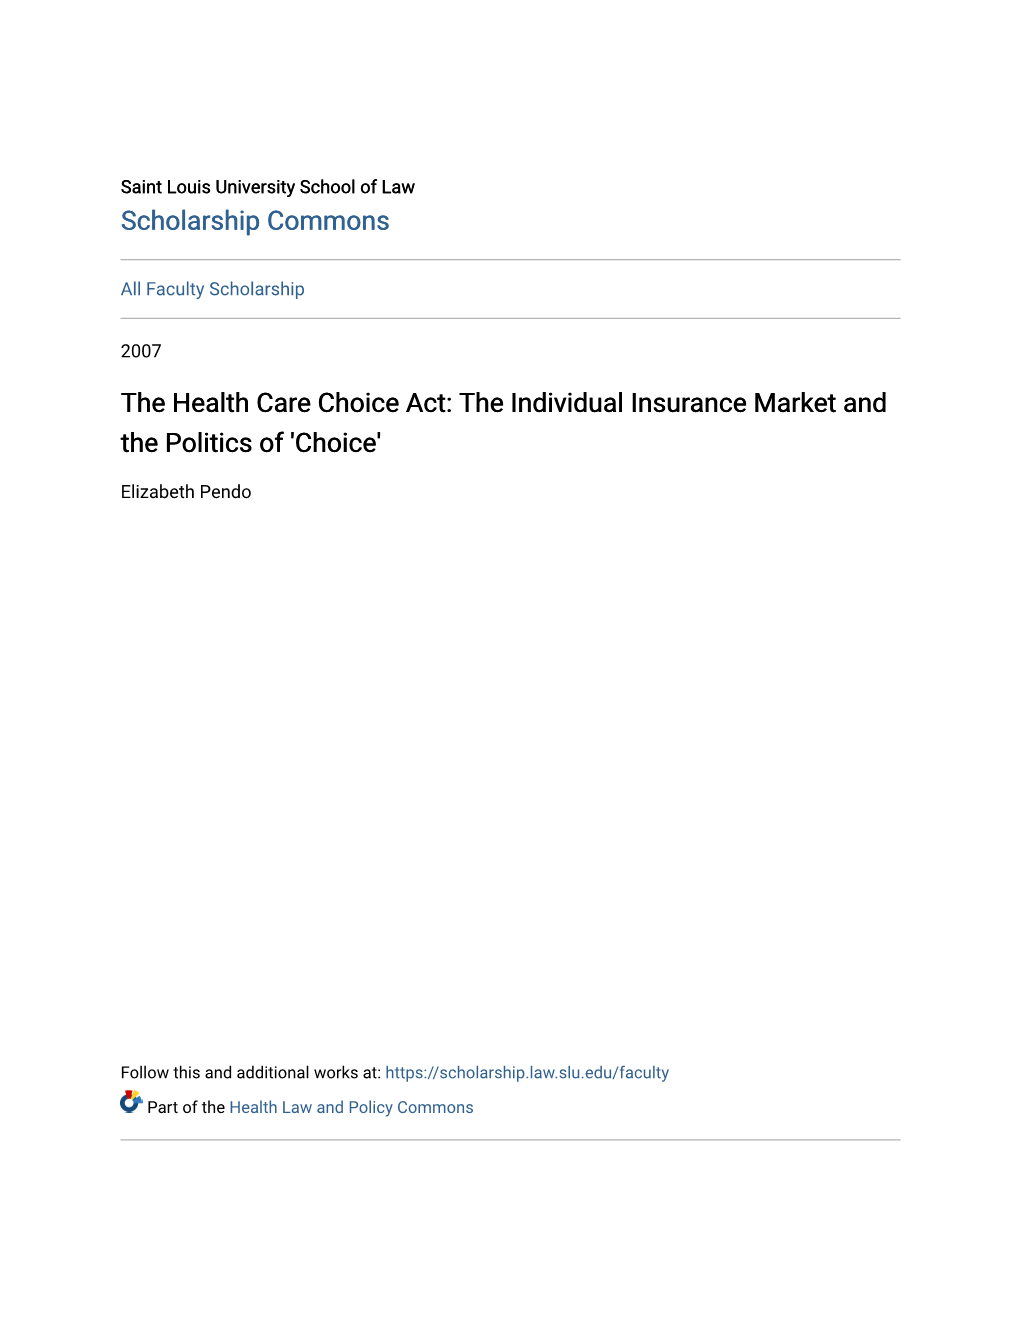 The Health Care Choice Act: the Individual Insurance Market and the Politics of 'Choice'